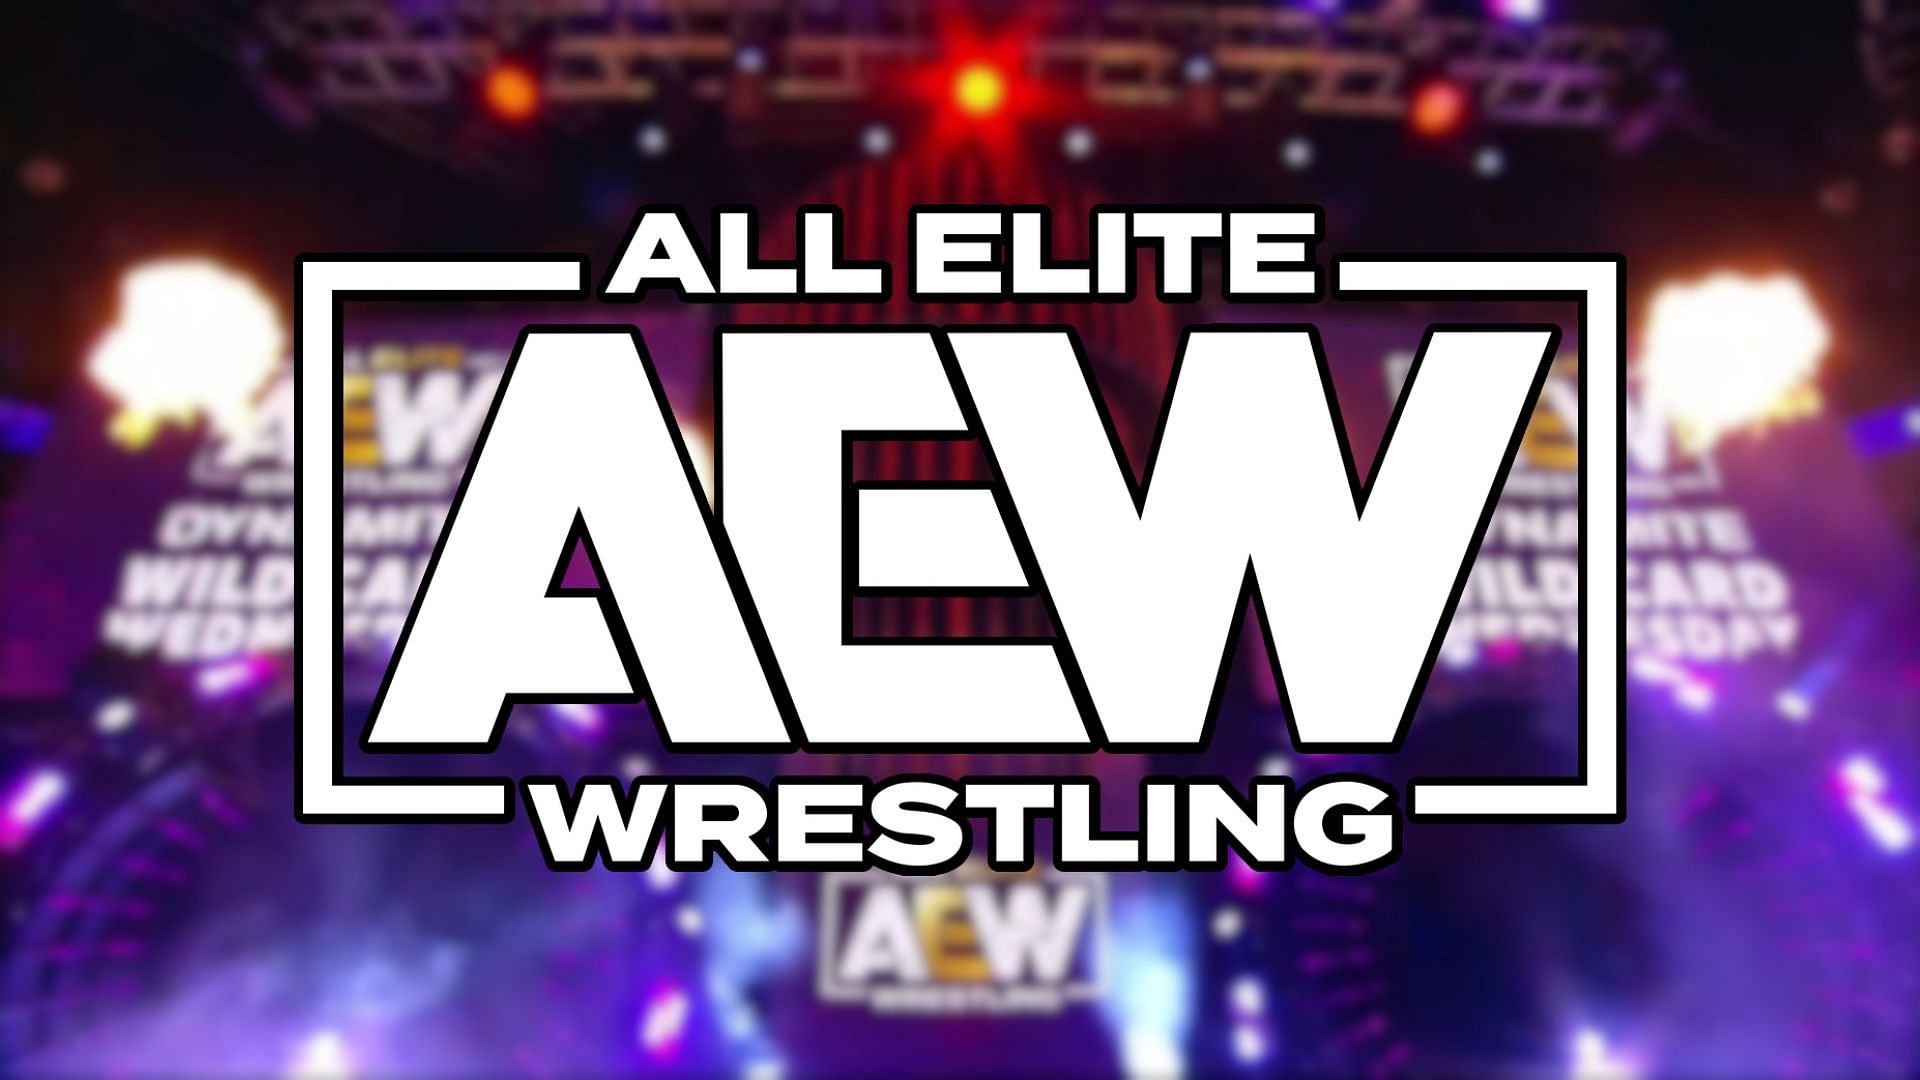 Huge AEW debut reportedly in the works